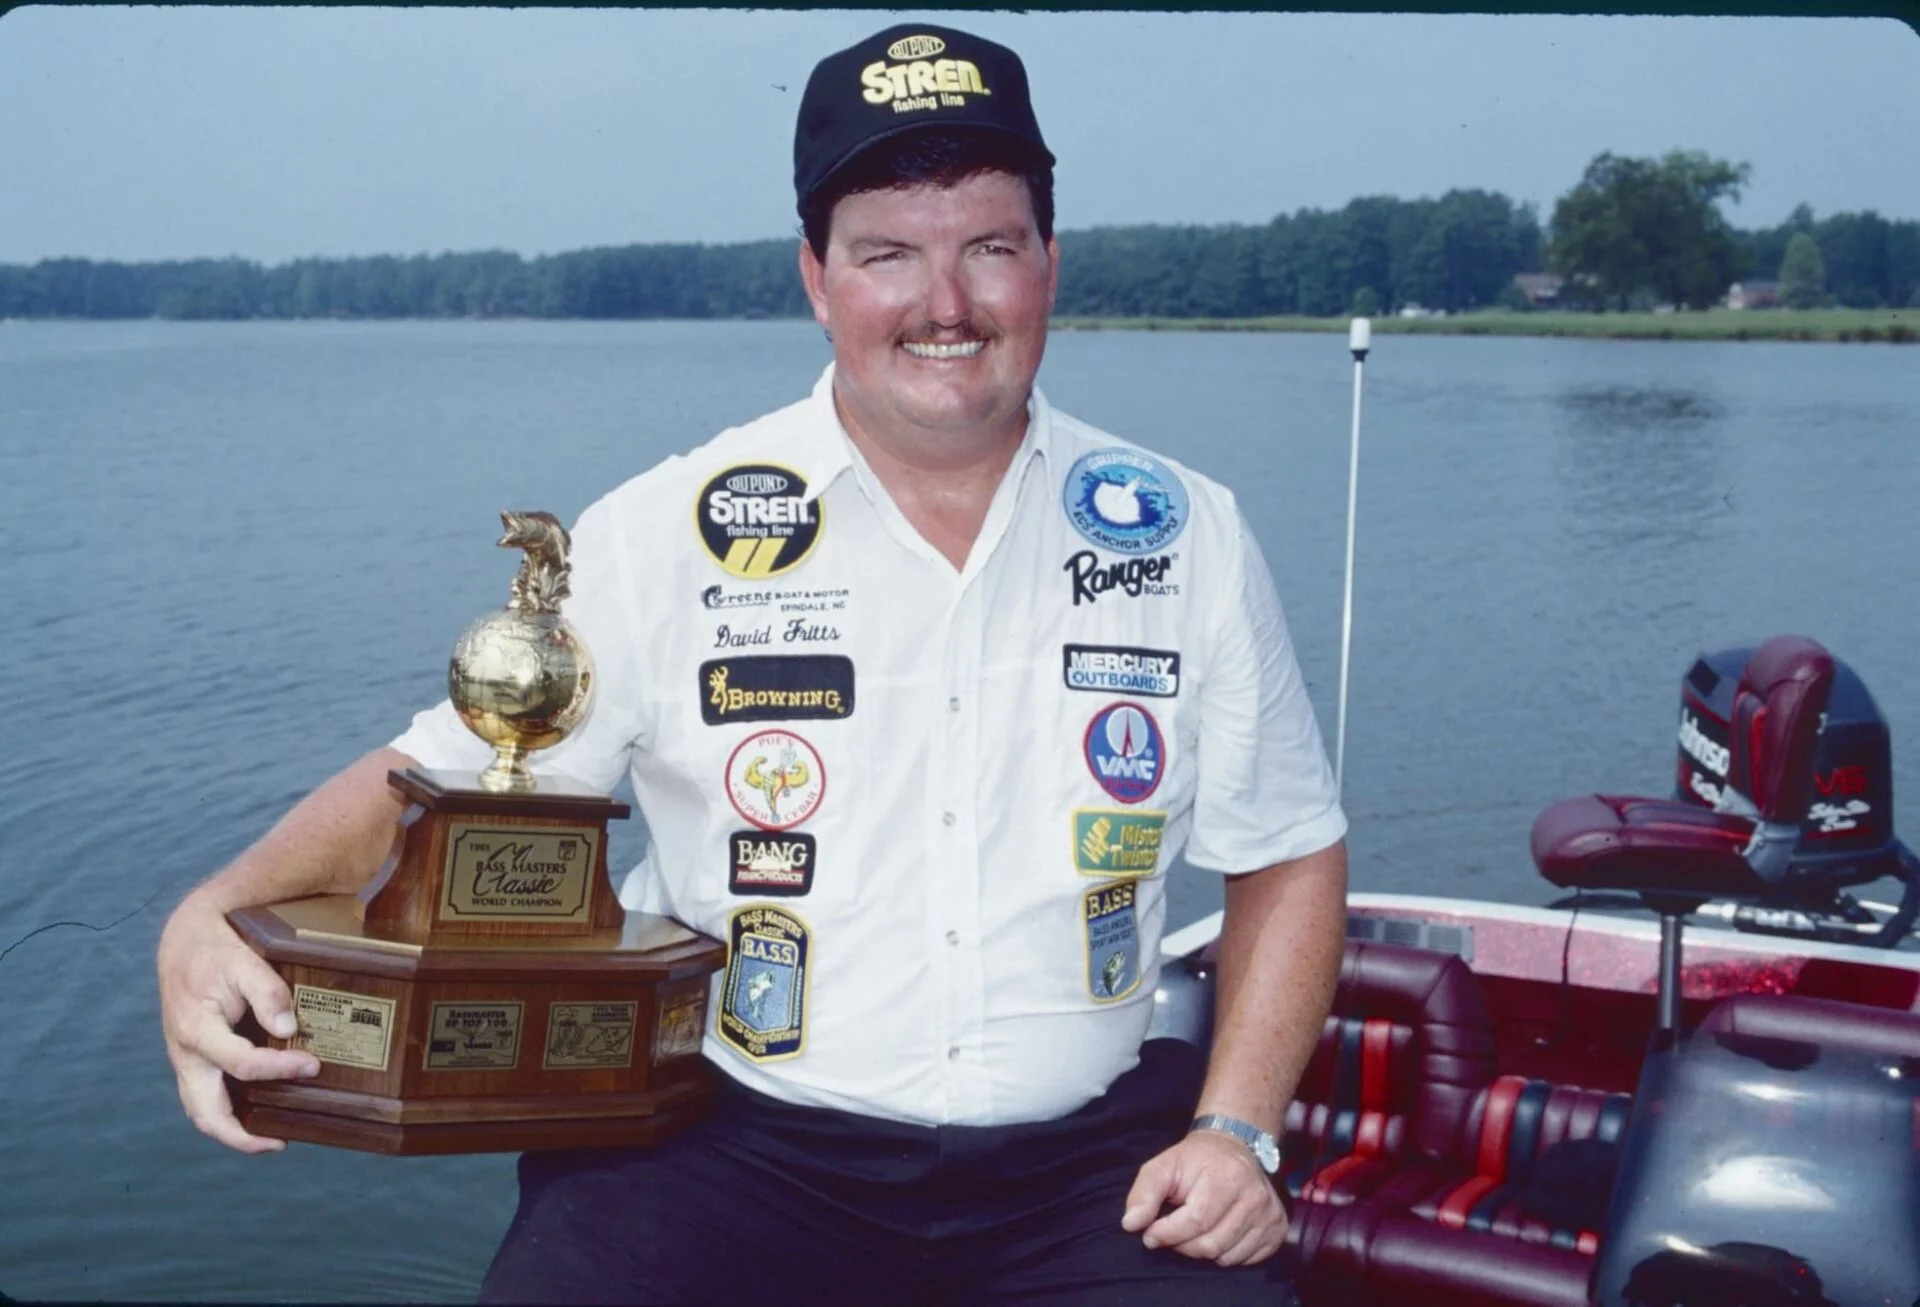 Former Bassmaster Angler of the Year and Bassmaster Classic champion David Fritts of Lexington, N.C., has announced his retirement.